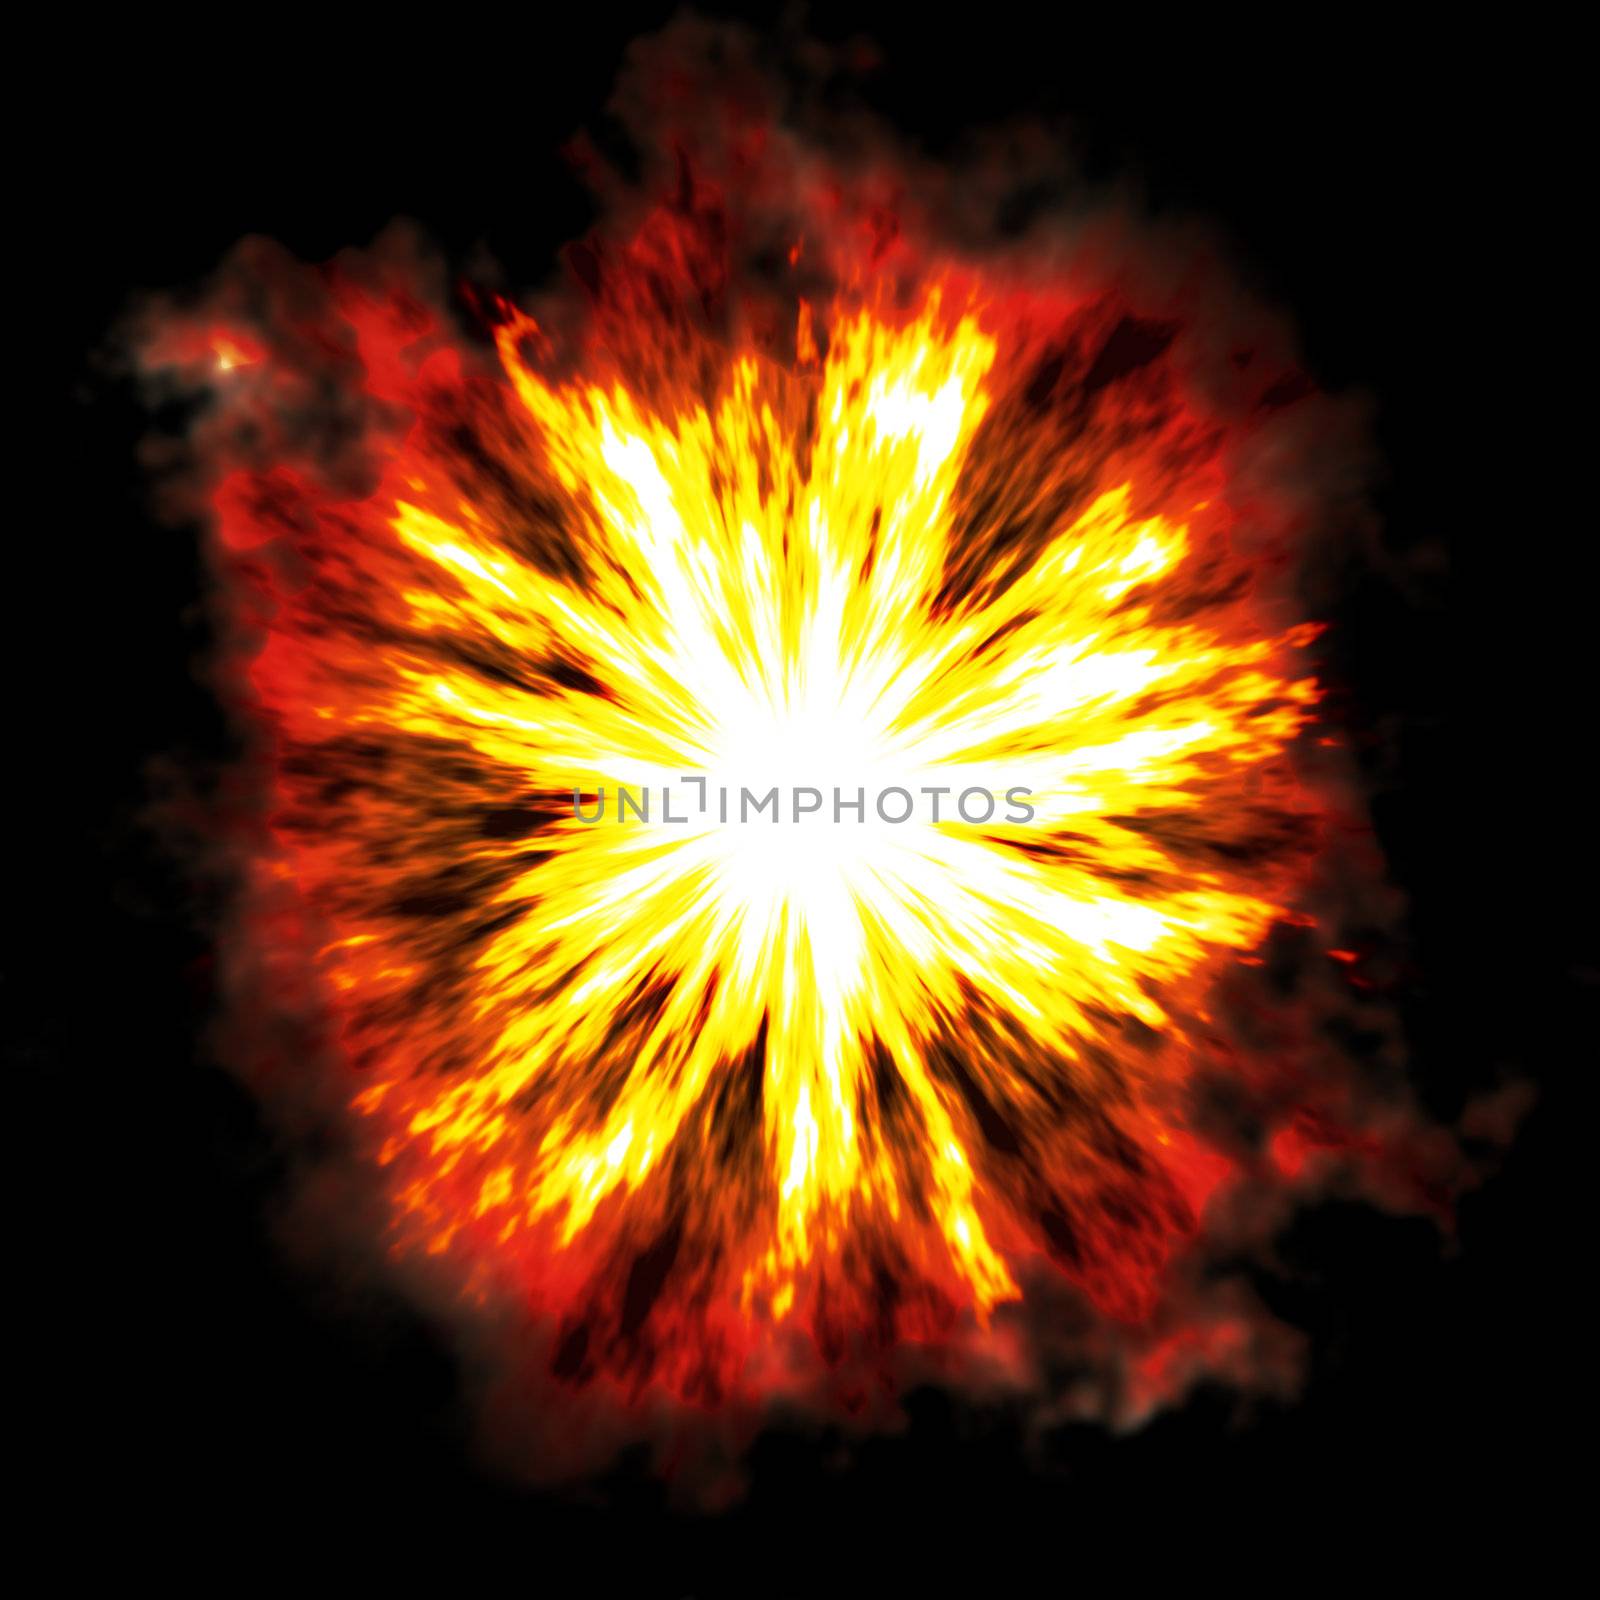 A fiery explosion busting over a black background.